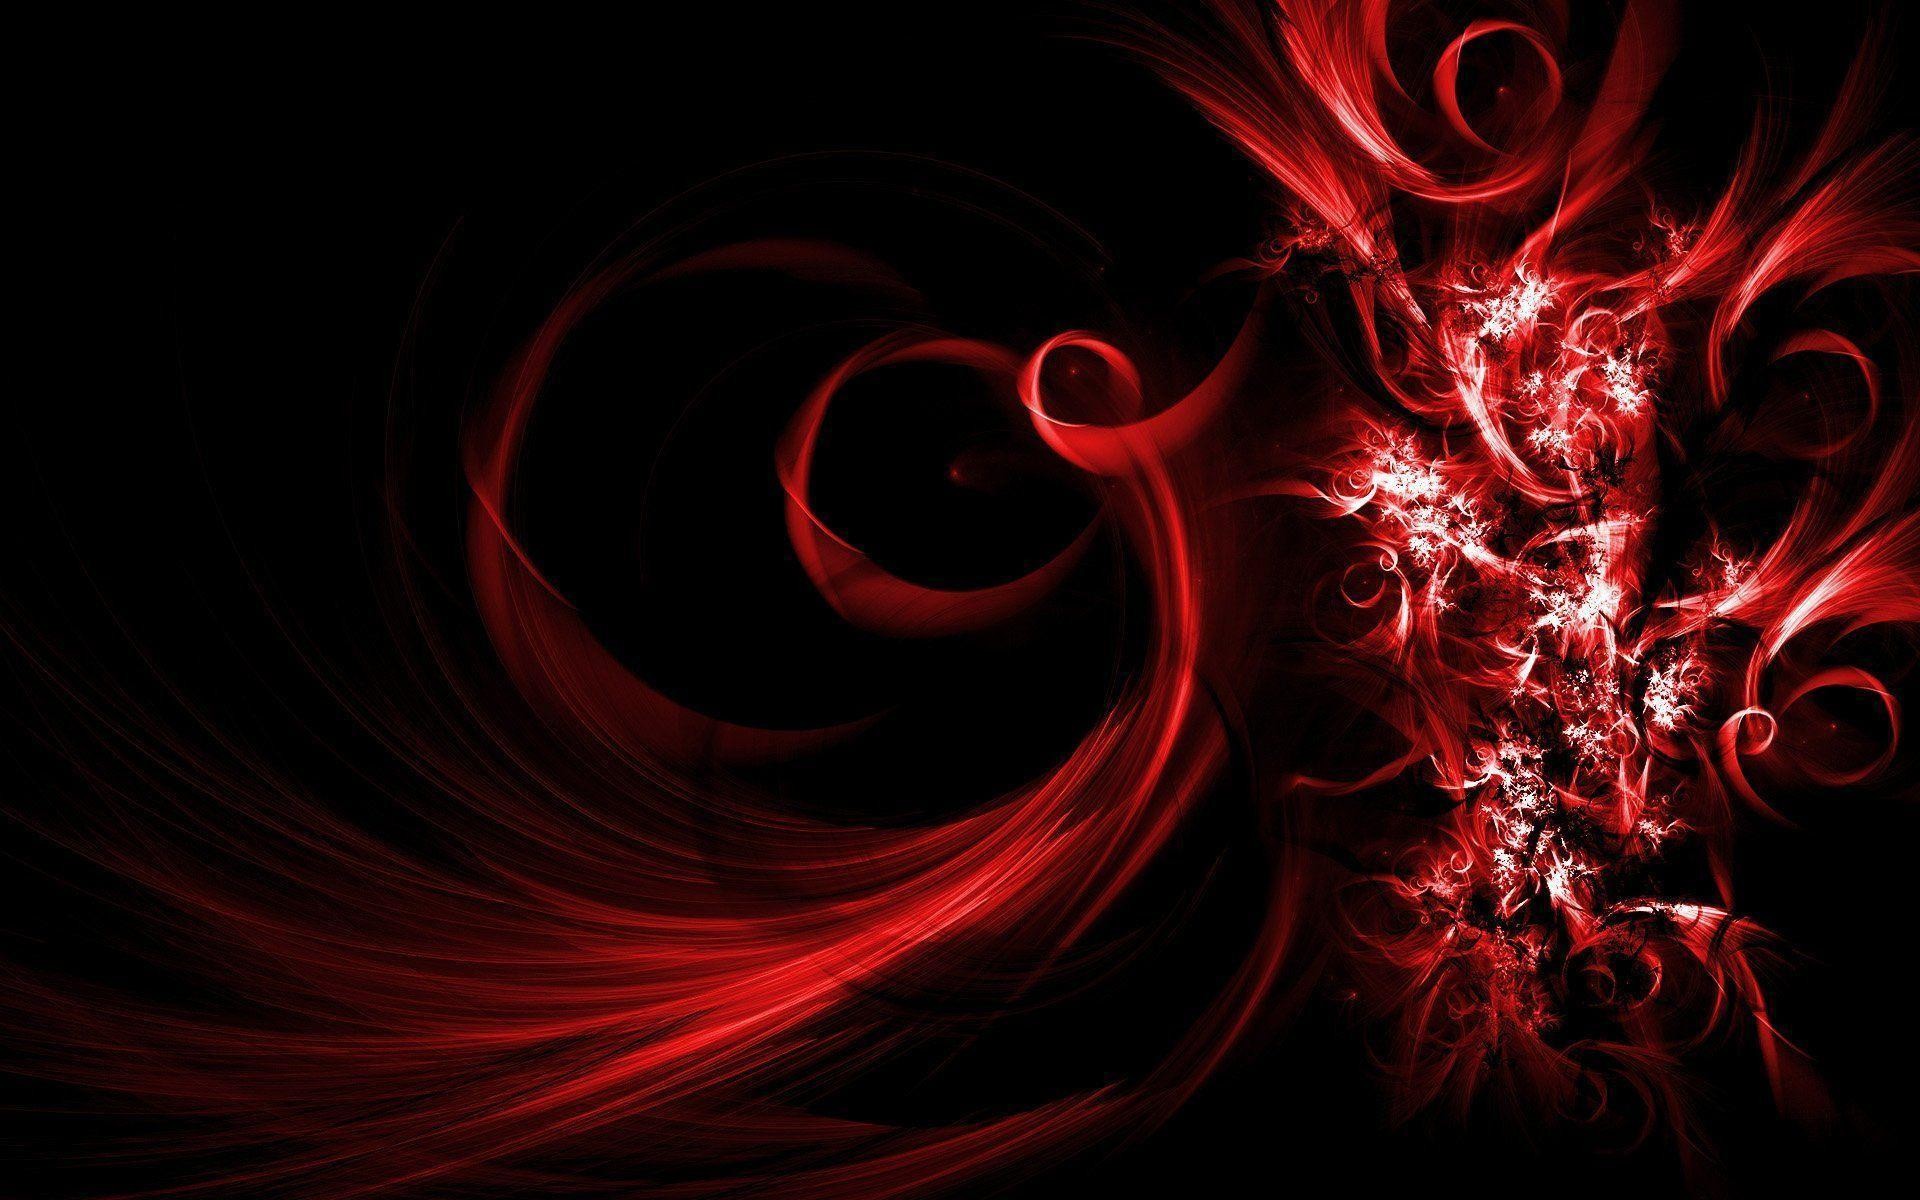 Black And Red Abstract Wallpaper Hd 1080P 12 HD Wallpapers isghd.com